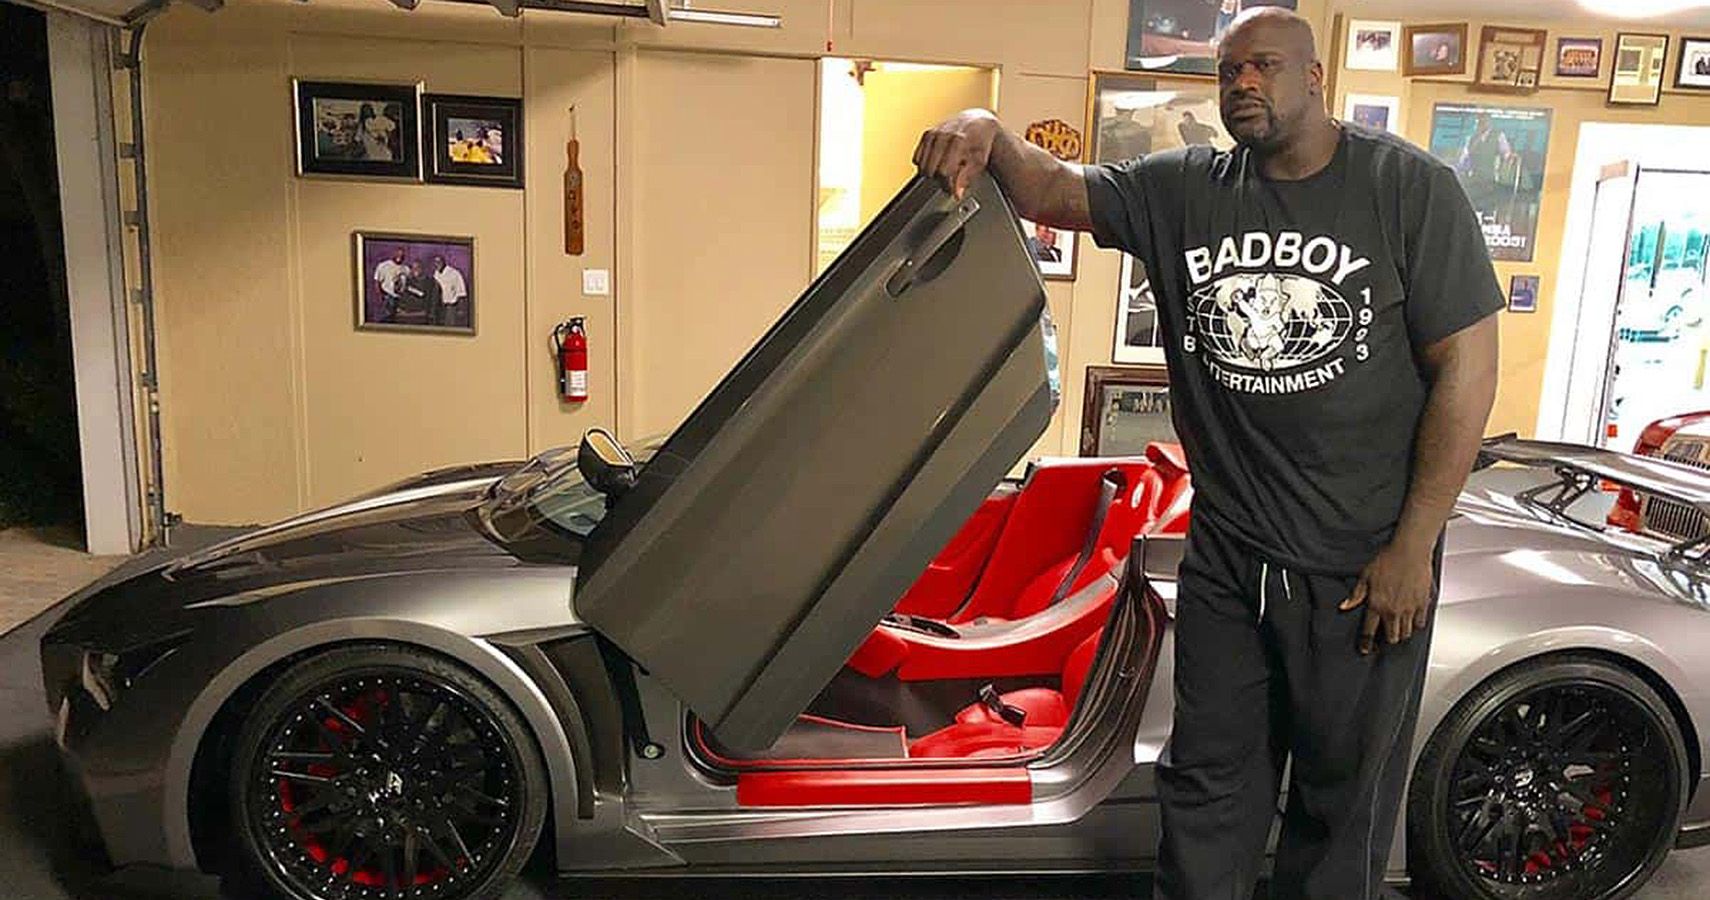 A Sick, Customized Two-Door Vaydor For Shaquille O'Neal